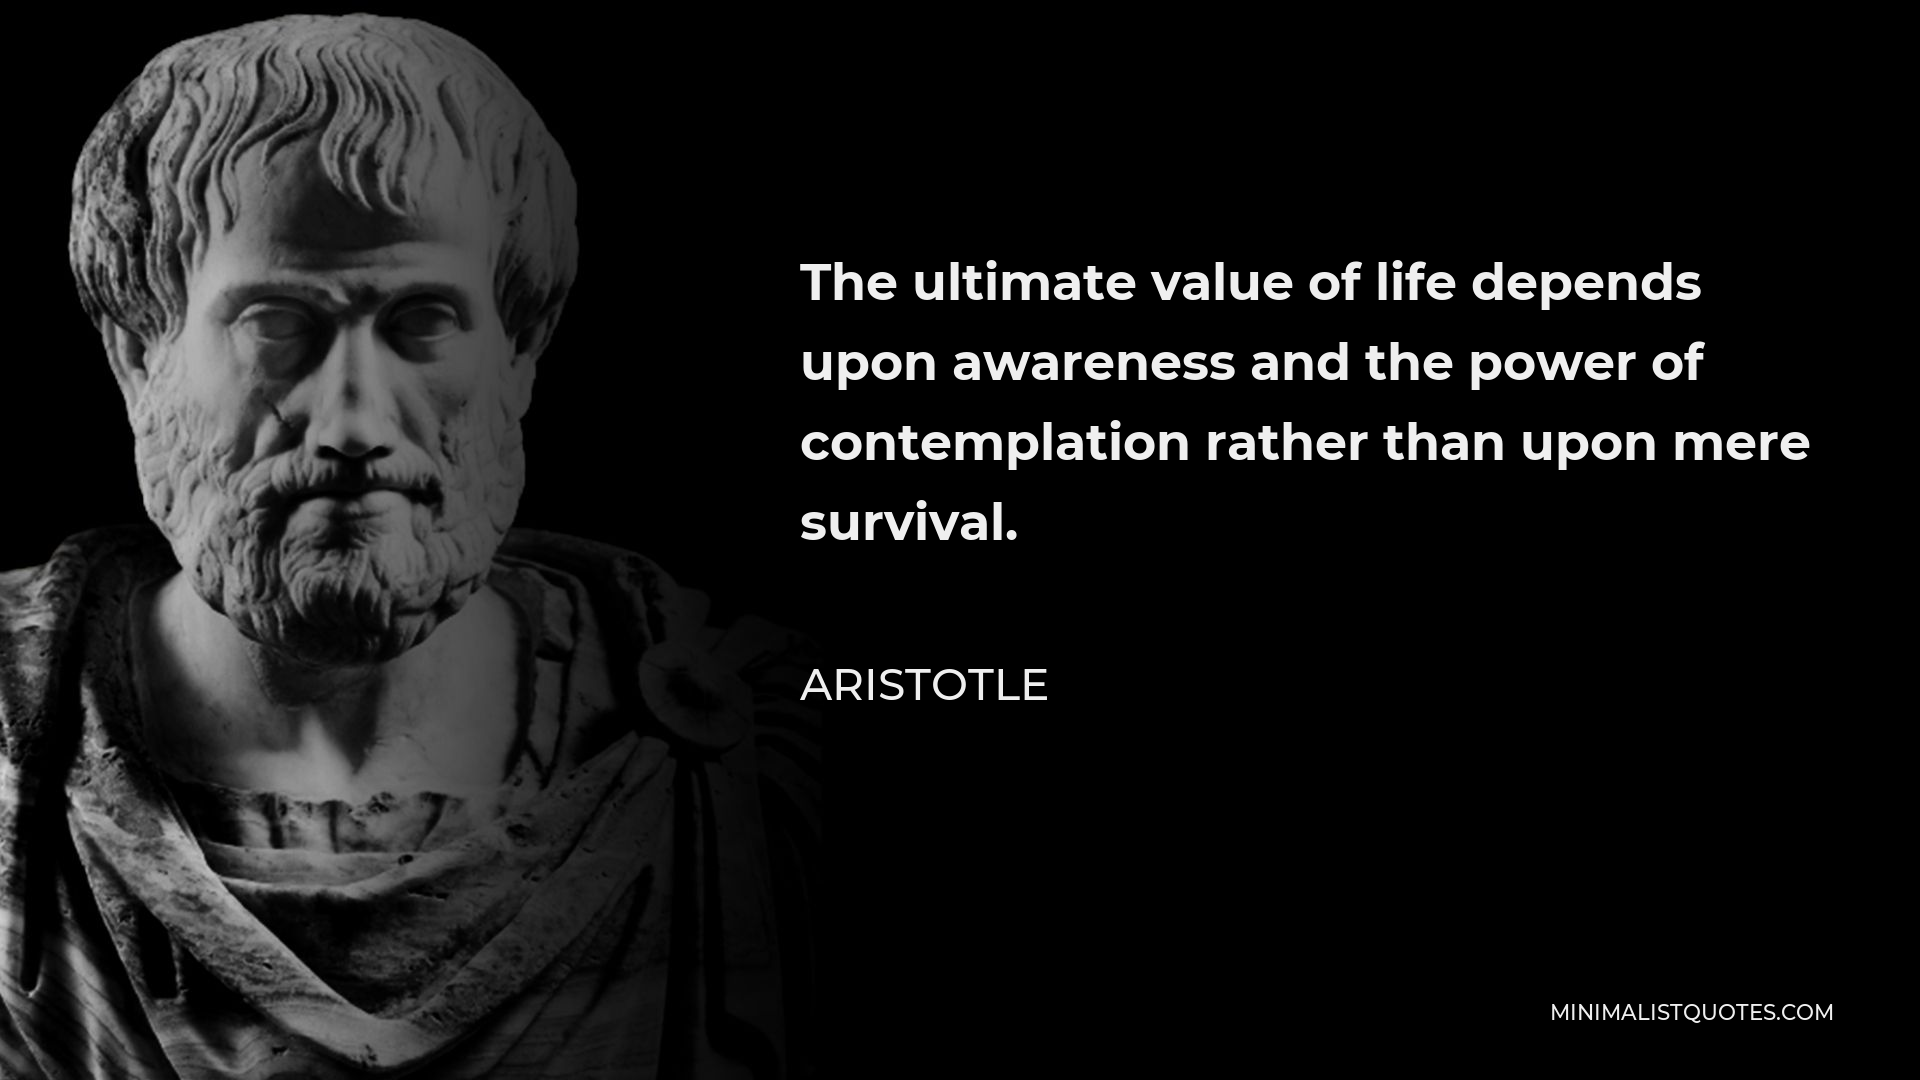 Aristotle Quote - The ultimate value of life depends upon awareness and the power of contemplation rather than upon mere survival.